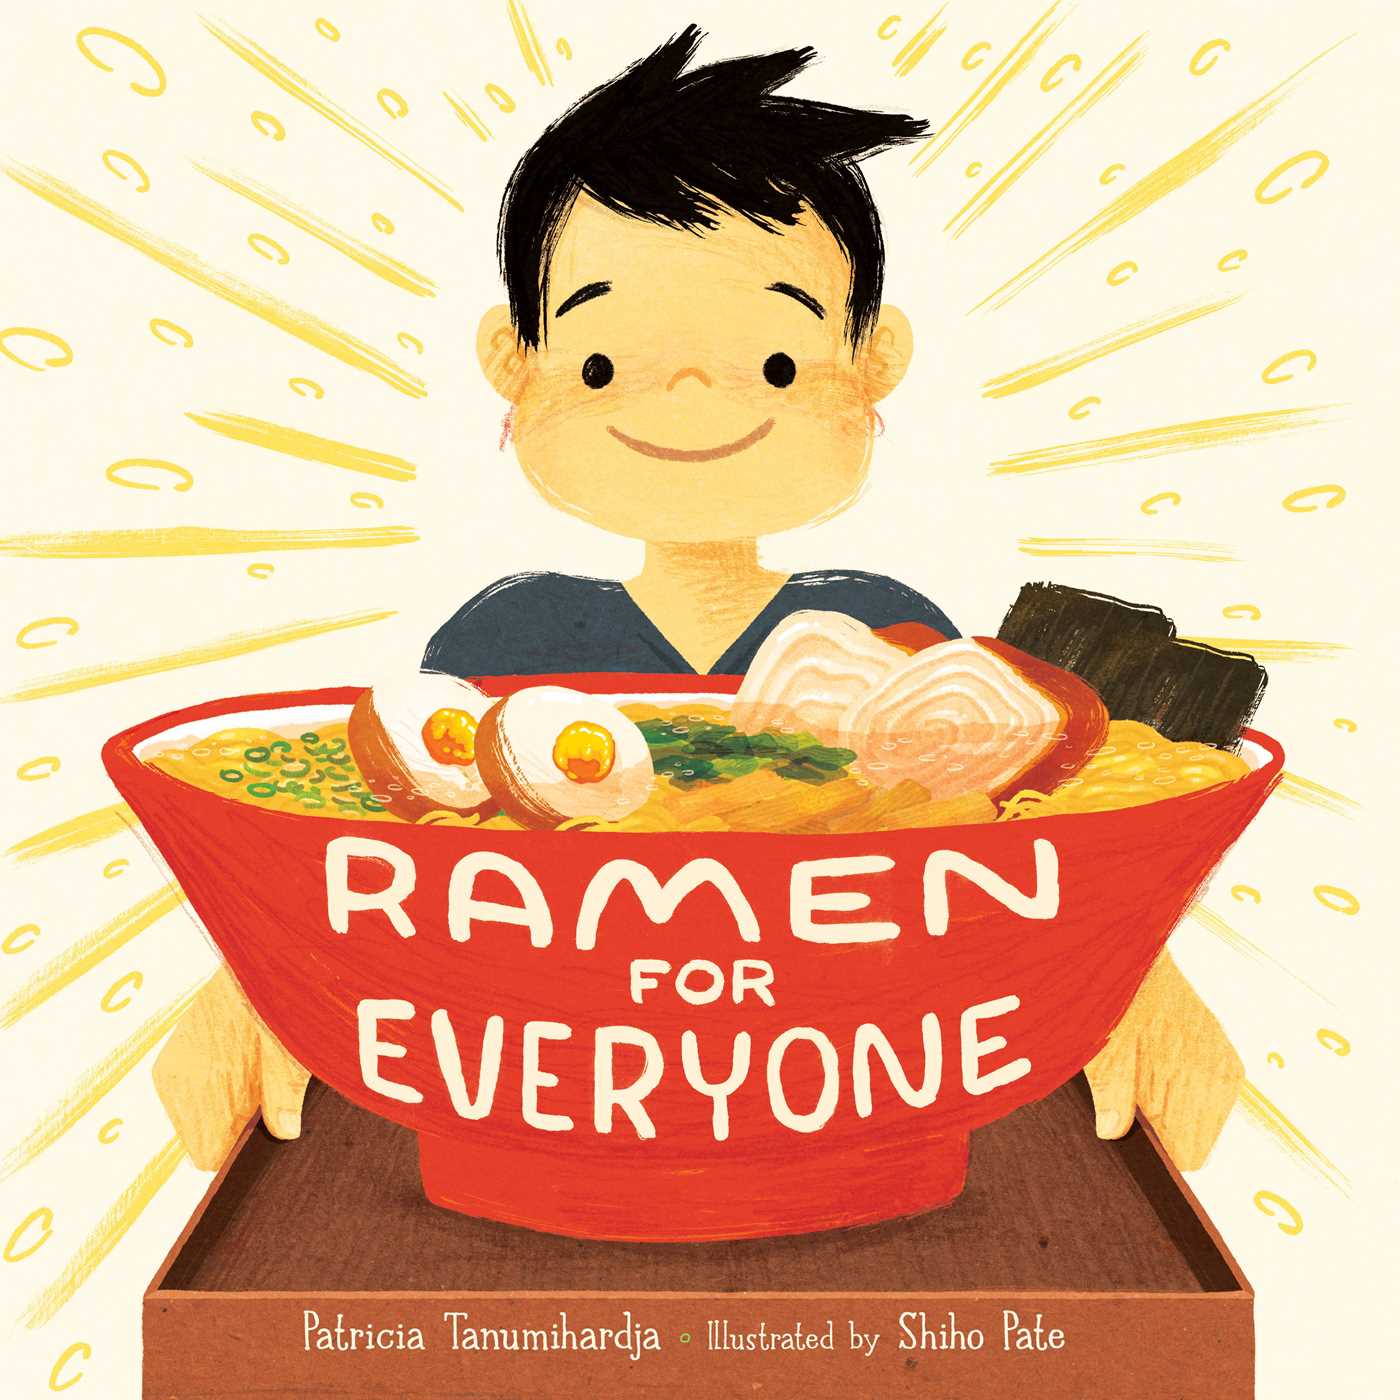 Image for "Ramen for Everyone"